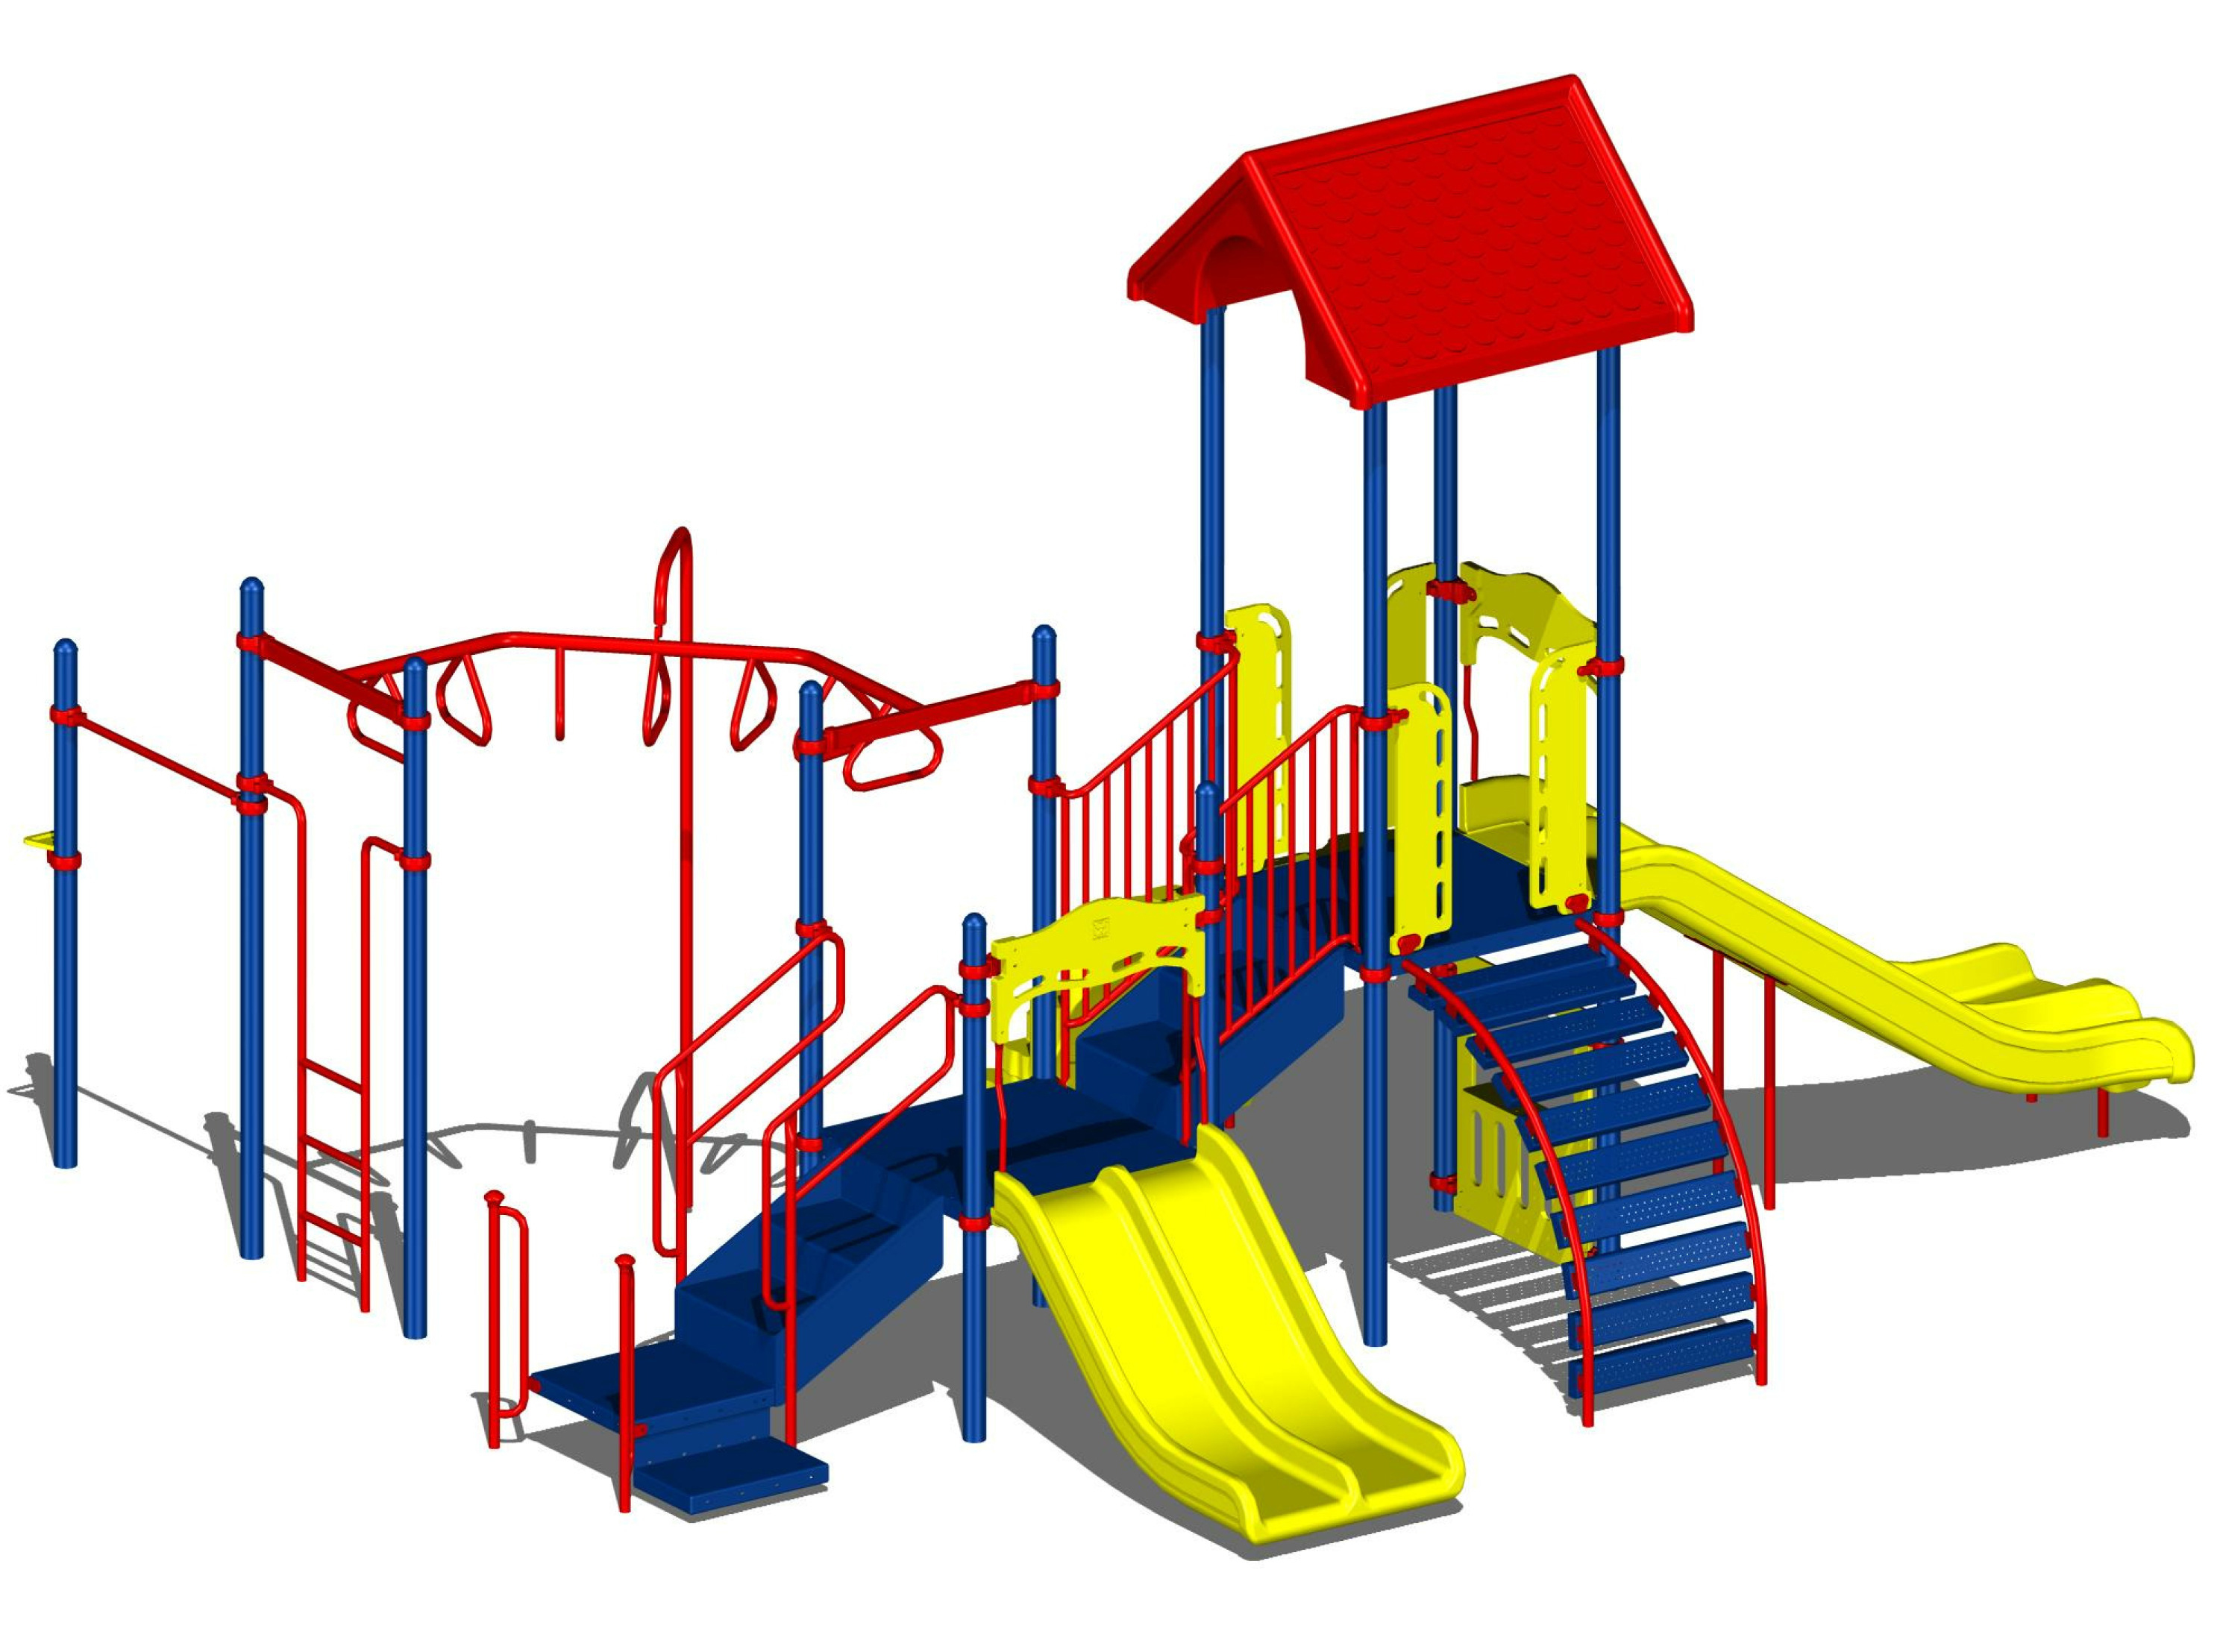 Playground Equipment | Clipart Panda - Free Clipart Images